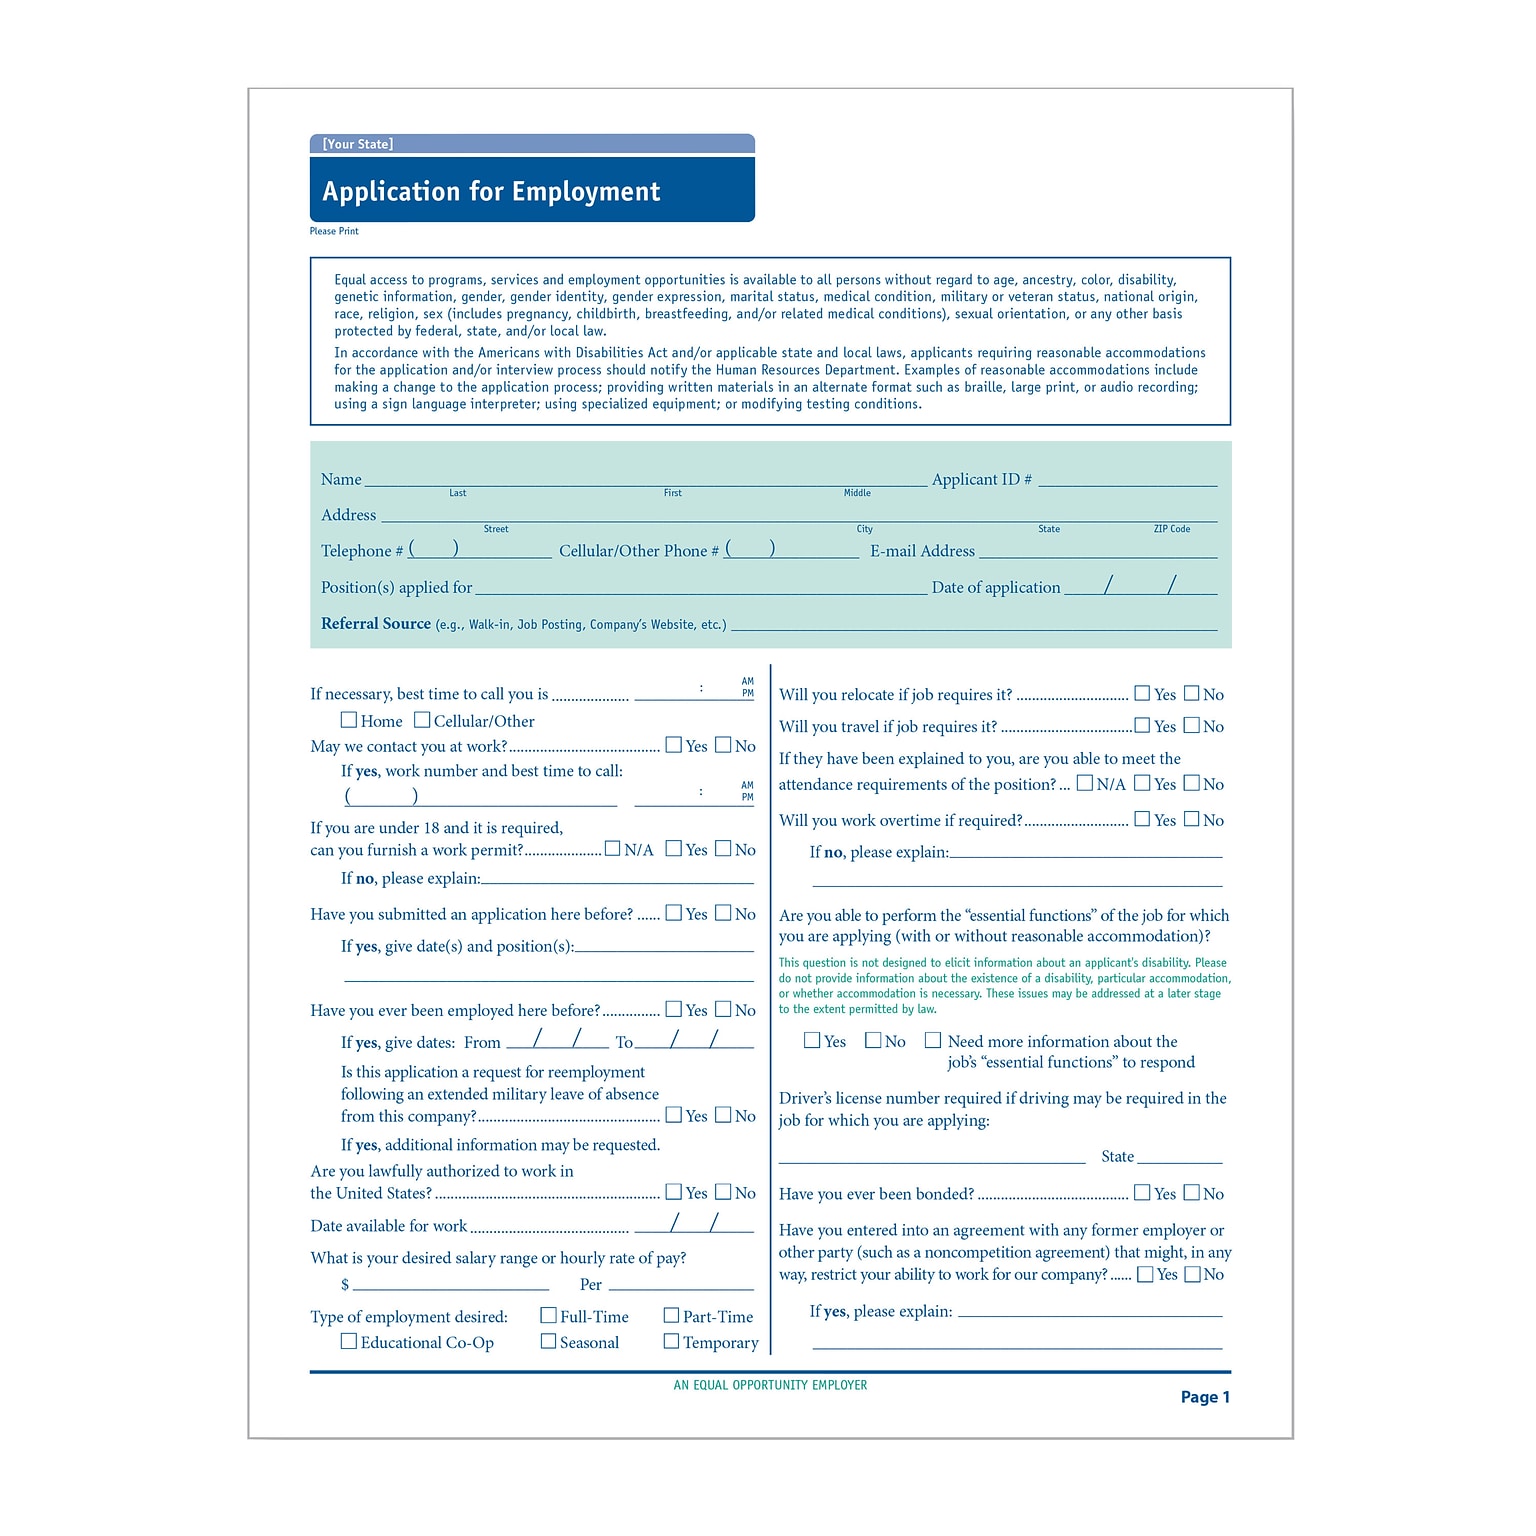 ComplyRight™ Kentucky Job Application, Pack of 50 (A2179KY)